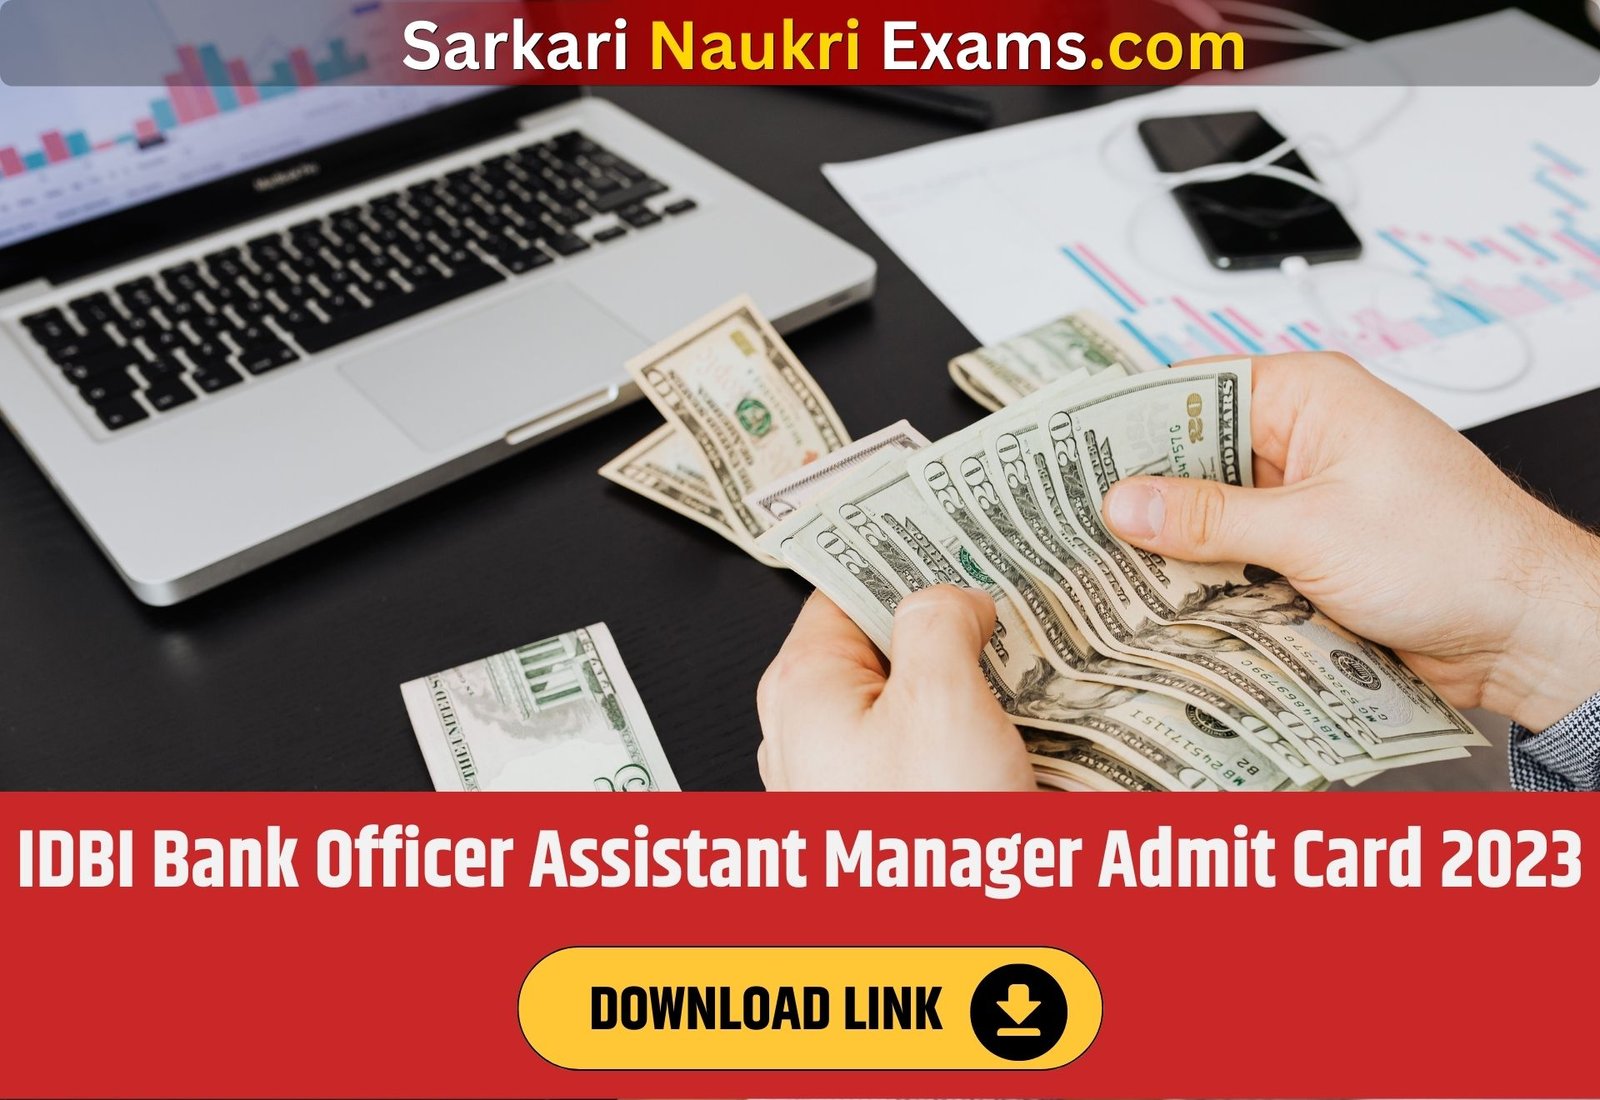 IDBI Bank Officer Assistant Manager Admit Card 2023 | Download Link, [Exam Date]